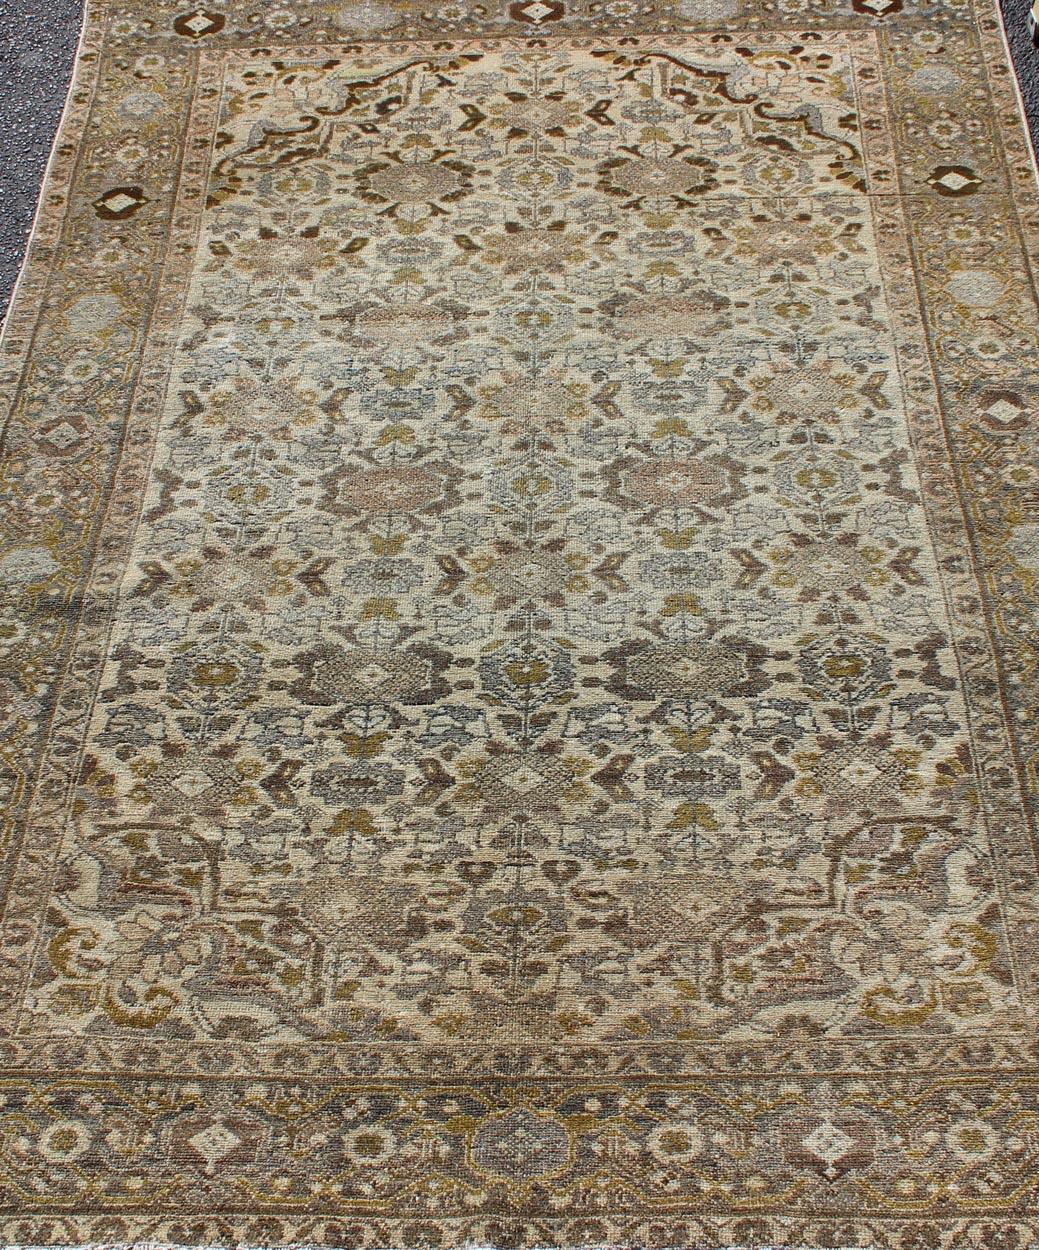 Antique Persian Malayer Rug with All-Over Boteh Design in Earth Tones 3